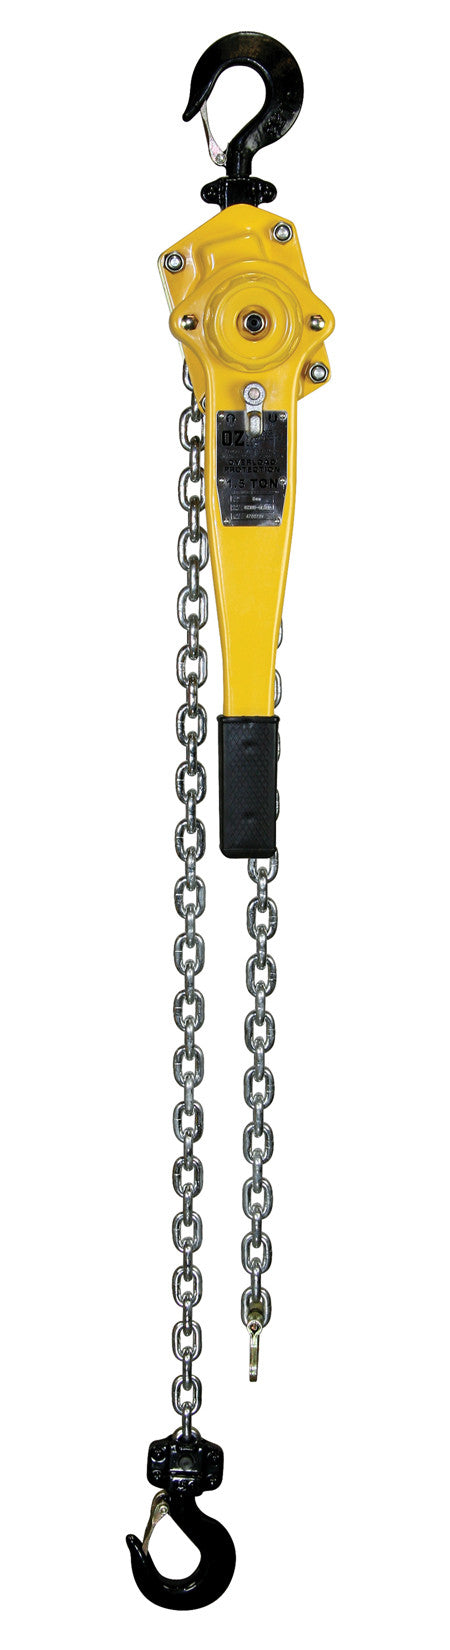 OZ Lifting, Premium Lever Hoist with Overload Protection